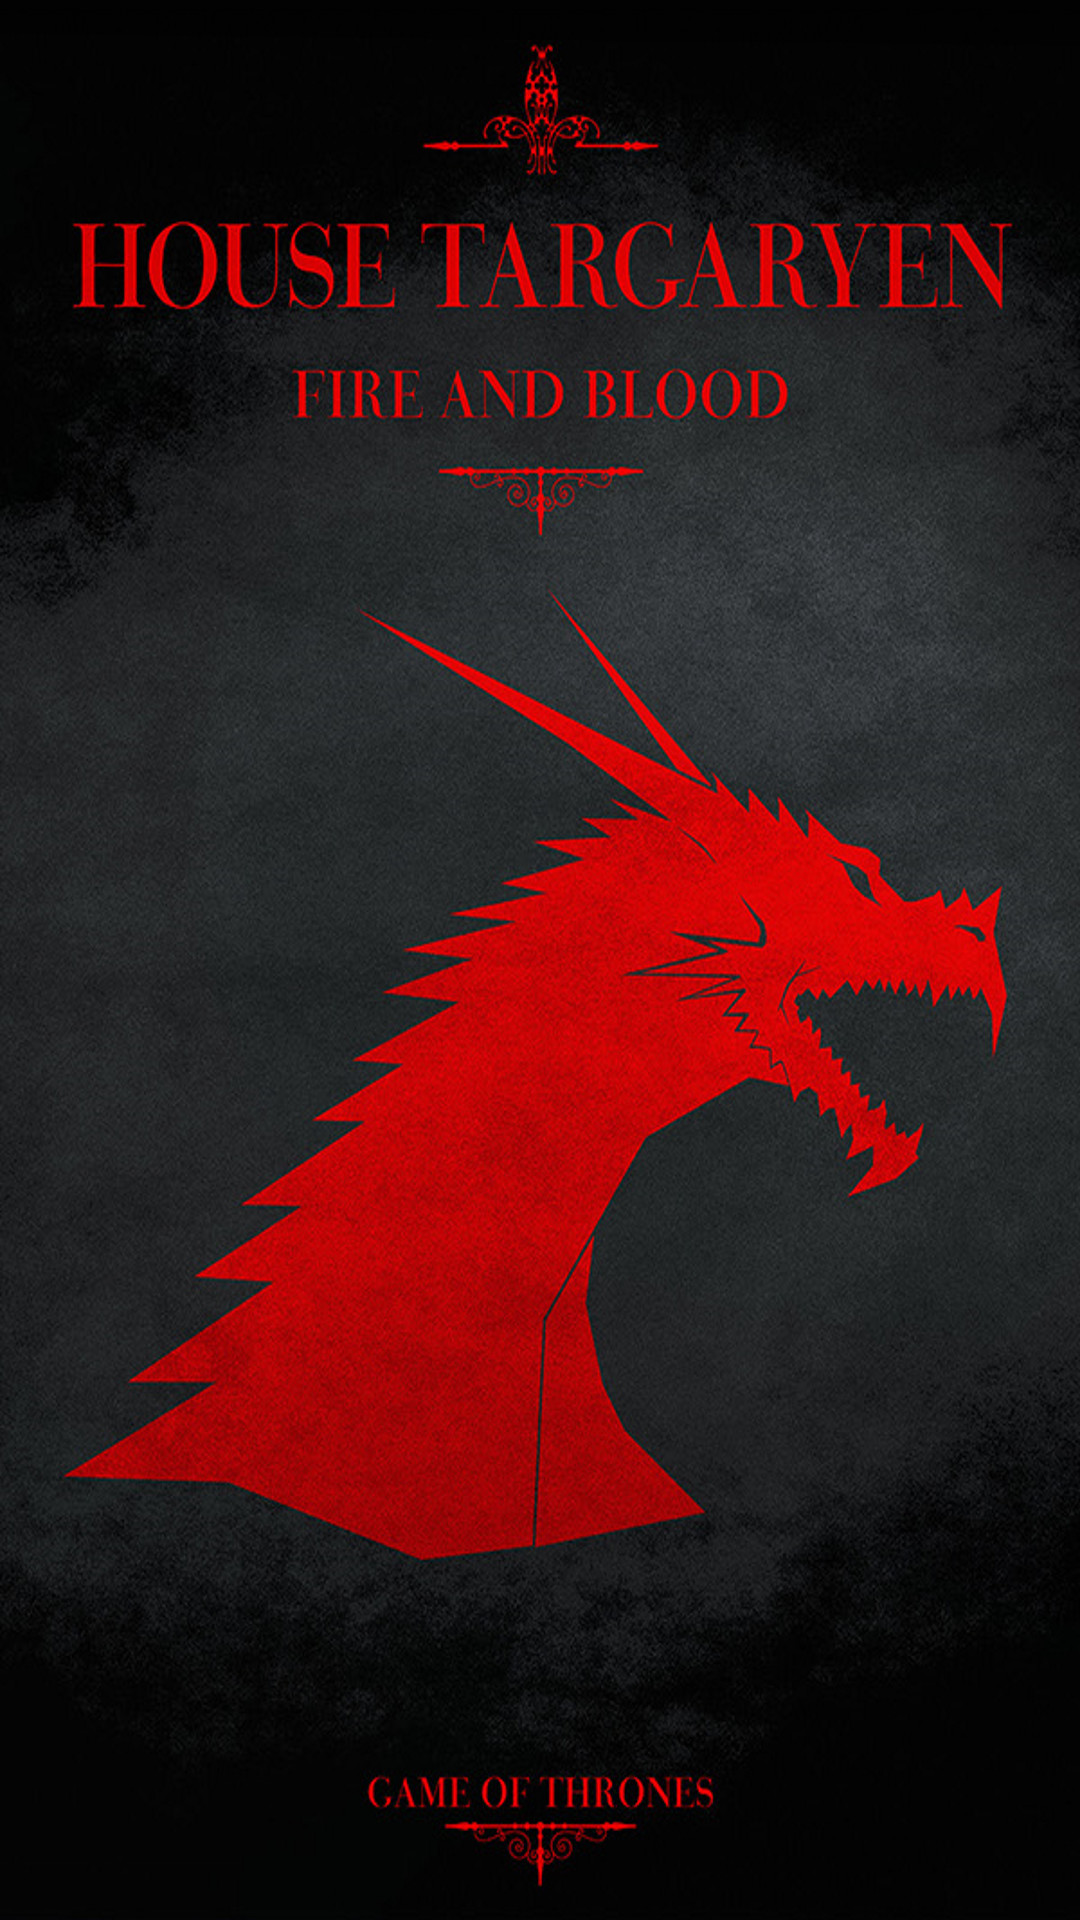 1080x1920 wallpaper for phone phone wallpapers game of thrones wallpaper game of  thrones house stark house lannister